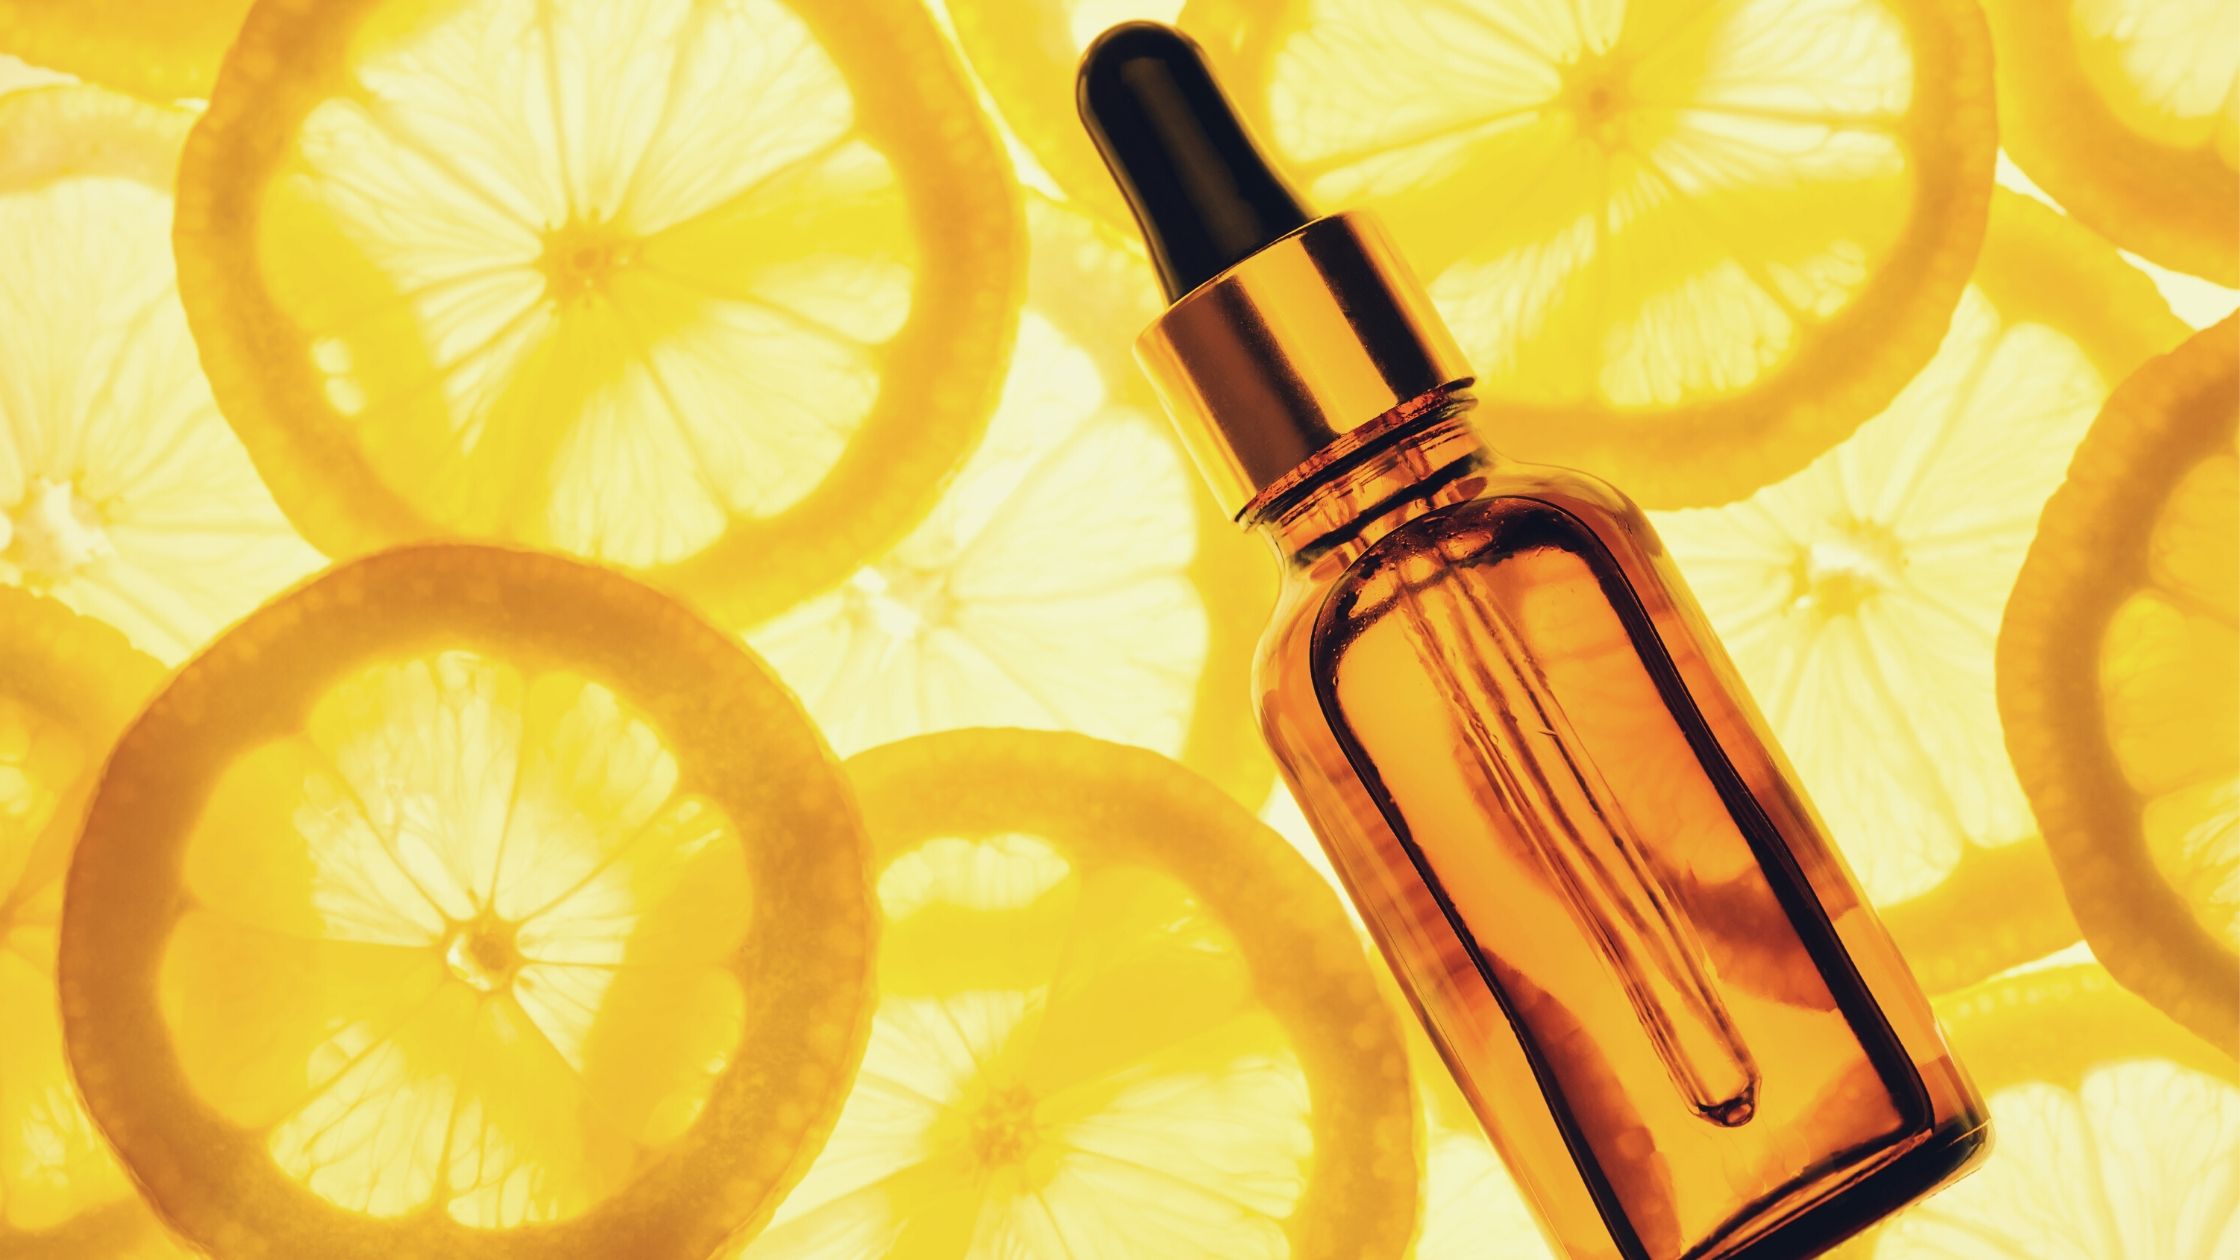 Find out how to include Vitamin C in your skin routine